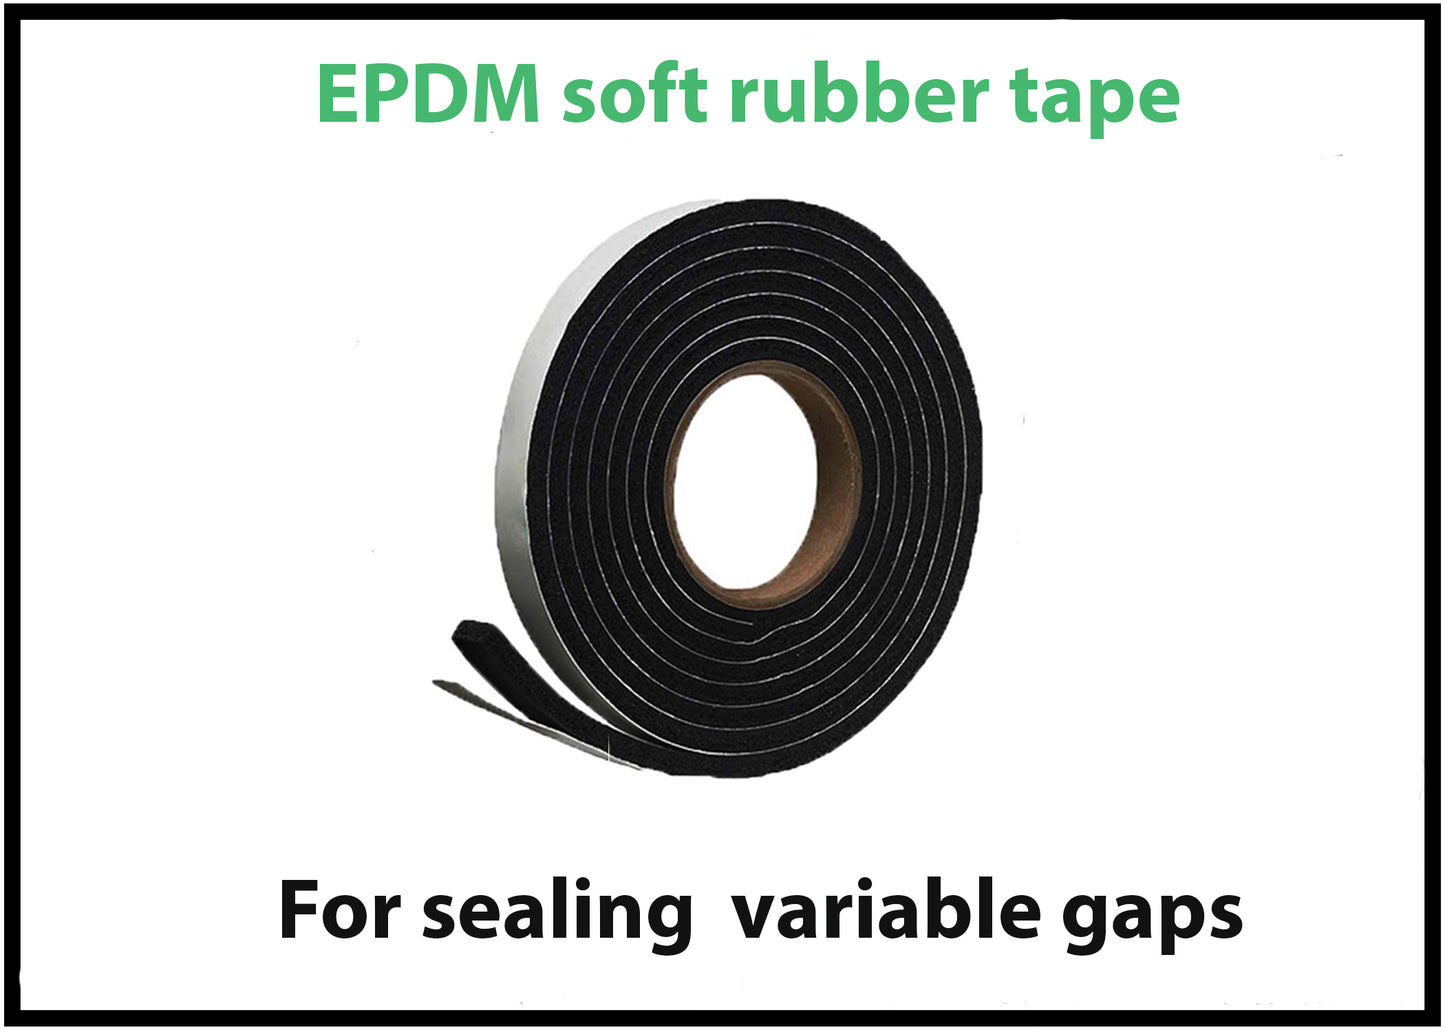 EPDM soft rubber tape